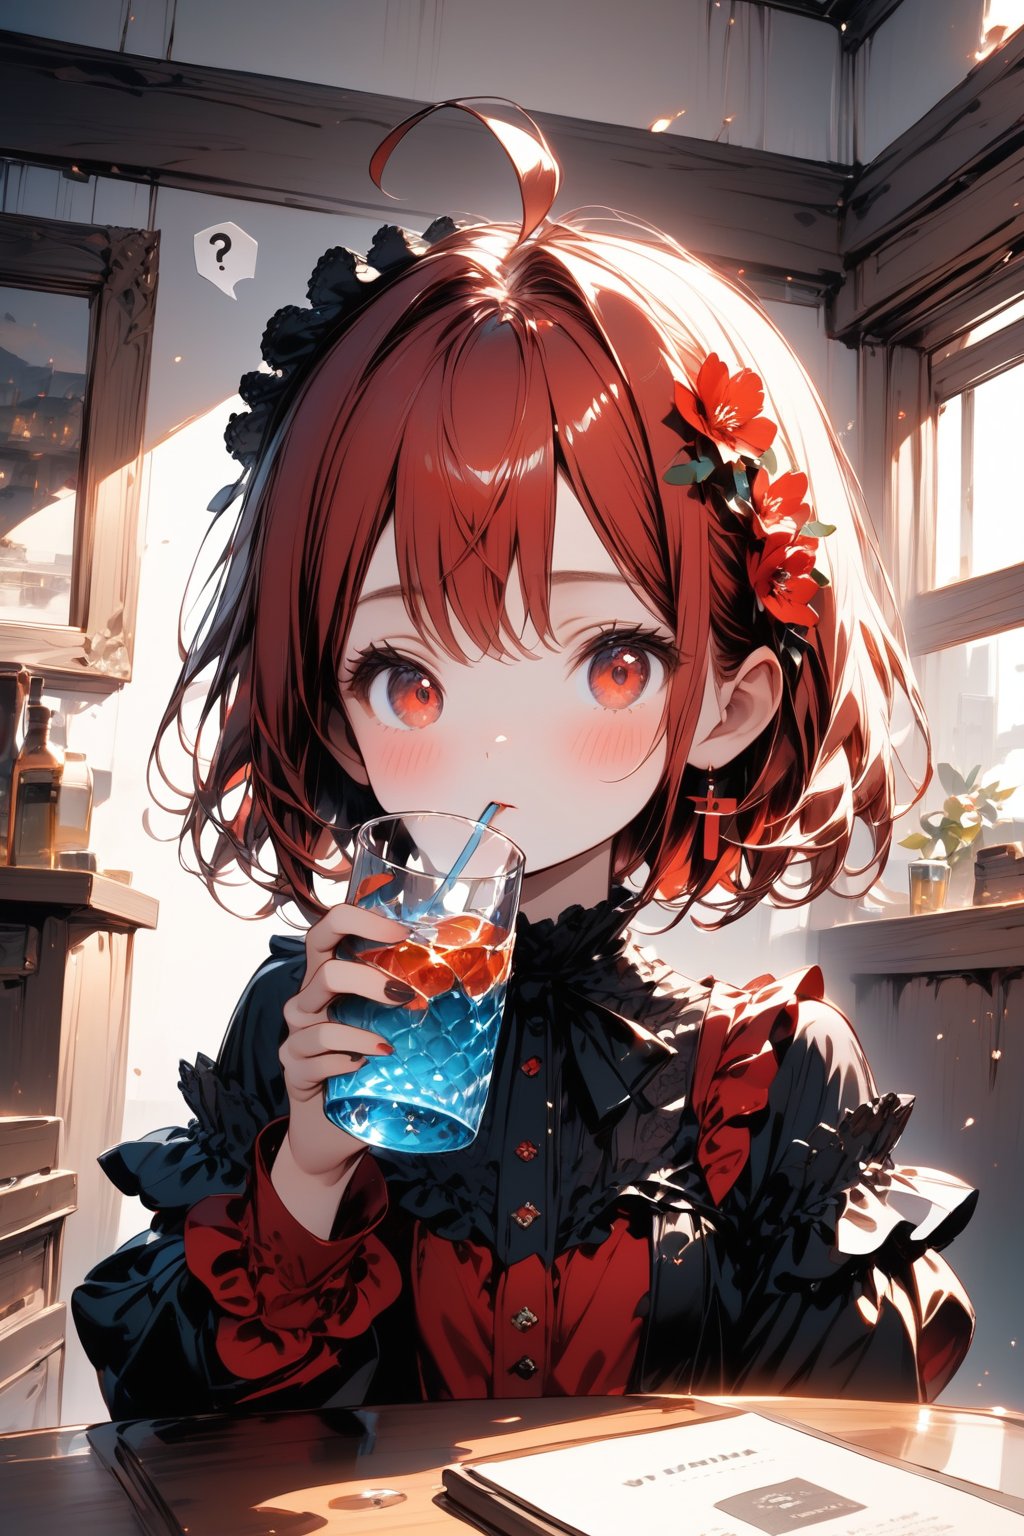 //quality, masterpiece:1.4, detailed:1.4, best quality:1.4,//,1girl,solo,//,red hair,short hair,ahoge,sidelocks,beautiful detailed eyes,glowing eyes,red eyes,//,hair_flowers,(bee_wings),black gothic_lolita,//,blush,expressionless,speech_balloon, (spoken_question_mark),?,??,//,(standing), drinking, drinking_glass,glass of (water),(holding glass of water),//,indoors,room,western style house,Details,Detailed Masterpiece,Deformed, close-up portrait 